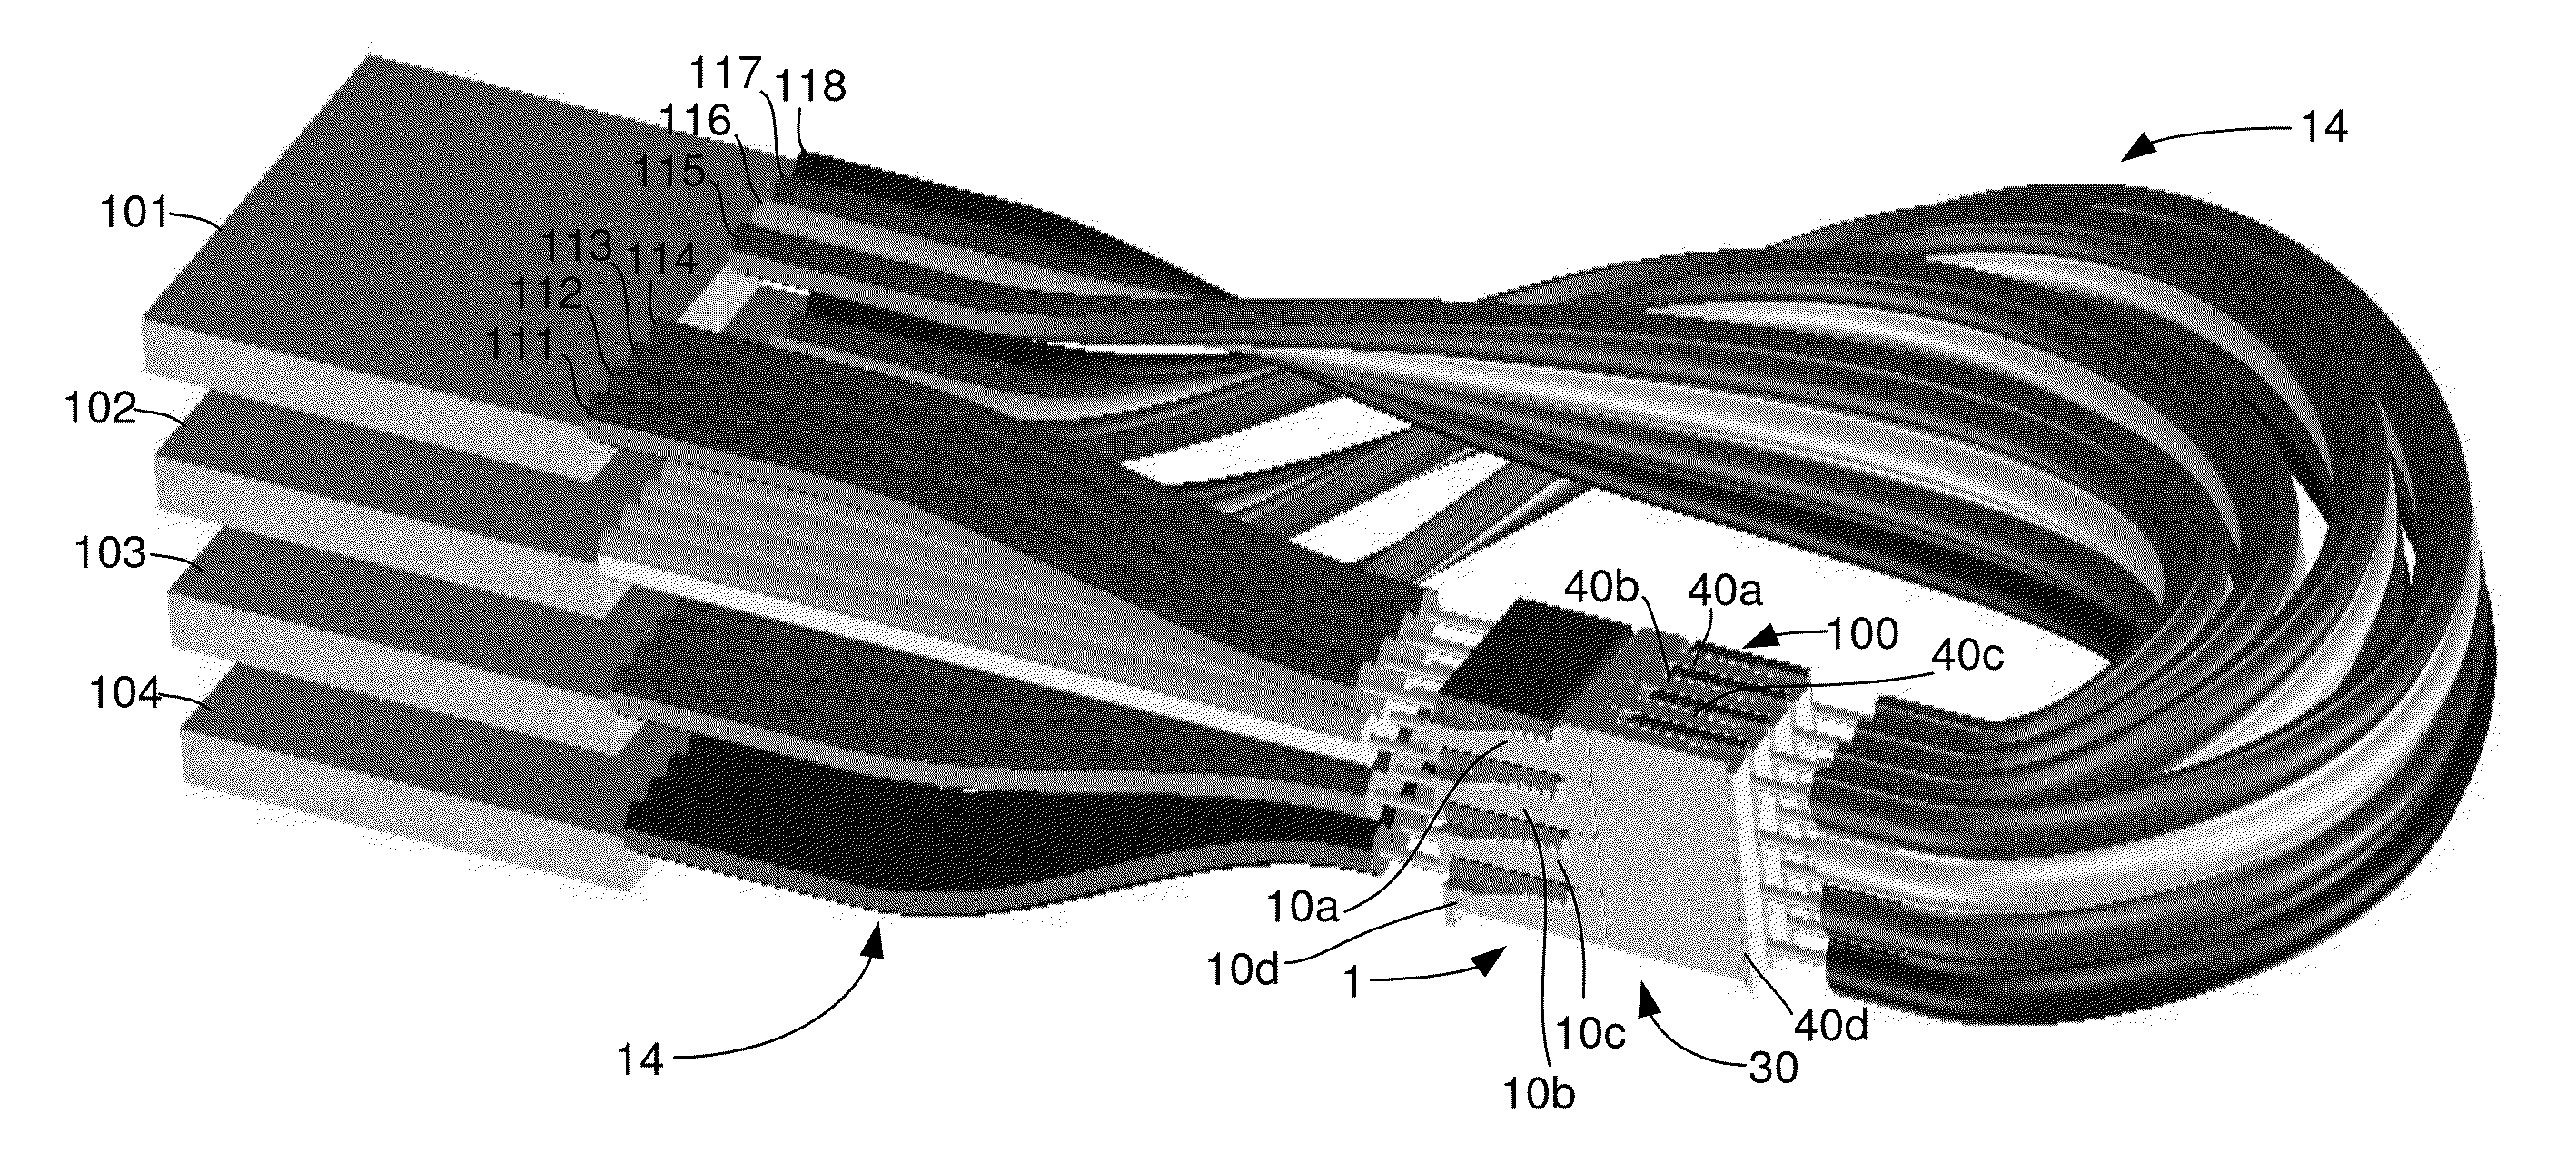 Optical cross-connect assembly and method